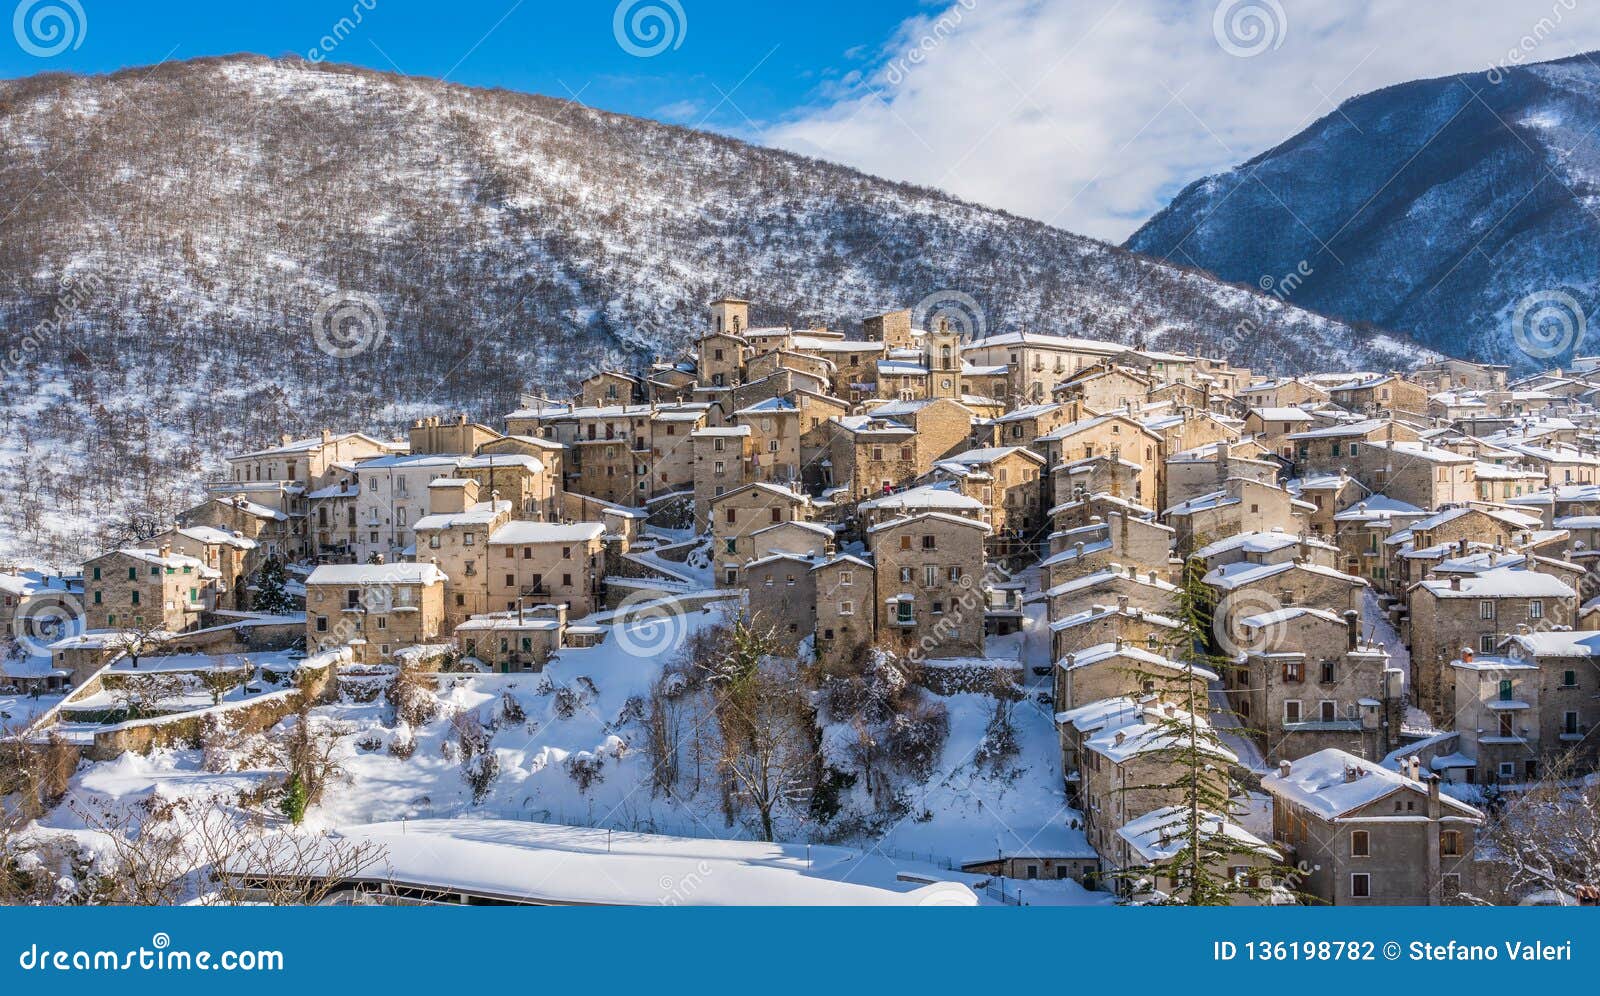 the beautiful scanno covered in snow during winter season. abruzzo, central italy.